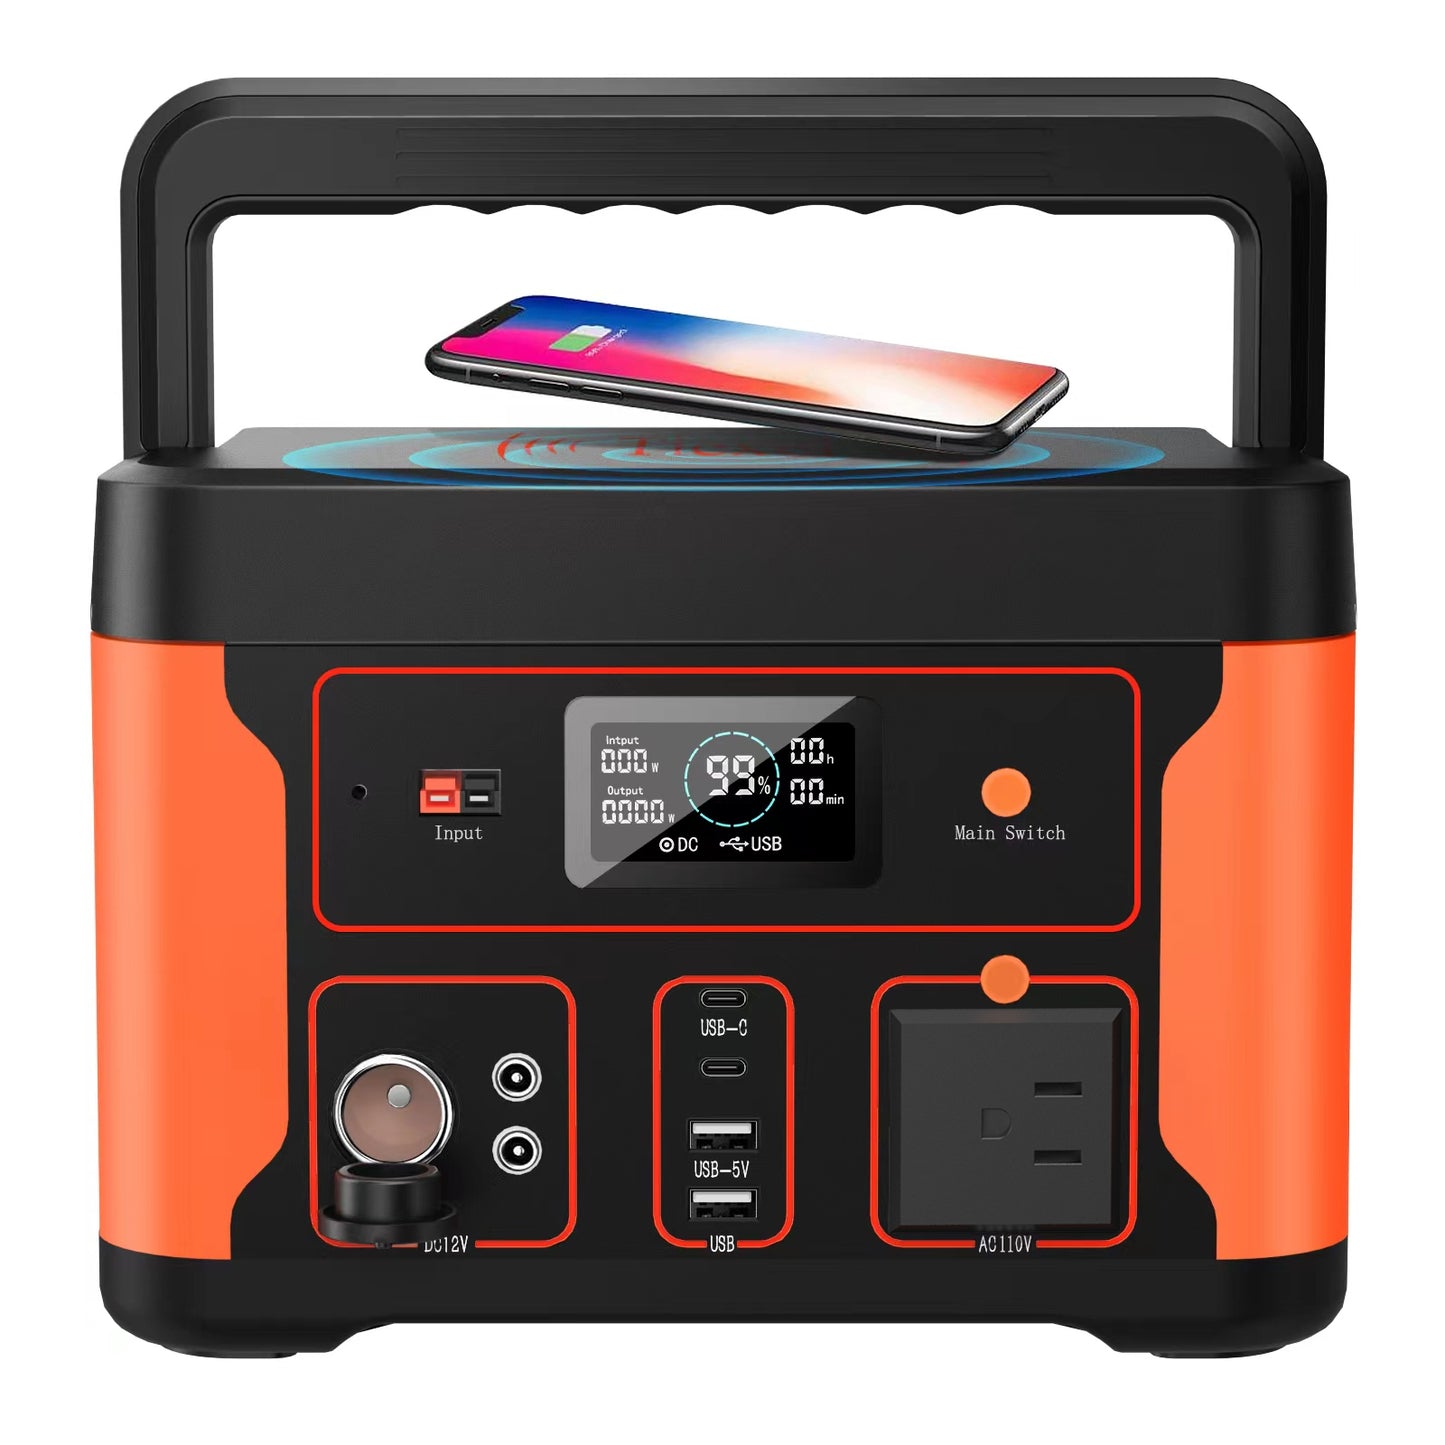 Tiexei power , 512WH Battery, 160000mAh Battery , LiFePO4 Battery, 600W Power , 600W Battery, Battery 600W , Power 600W， 1200W Power, Power 1200W ，fast charging Battery， mobile power, portable power station, home generator , generator ， power station outdoor, power station , LiFePO4, home backup power , Portable Power Station 600W, 512Wh Generator